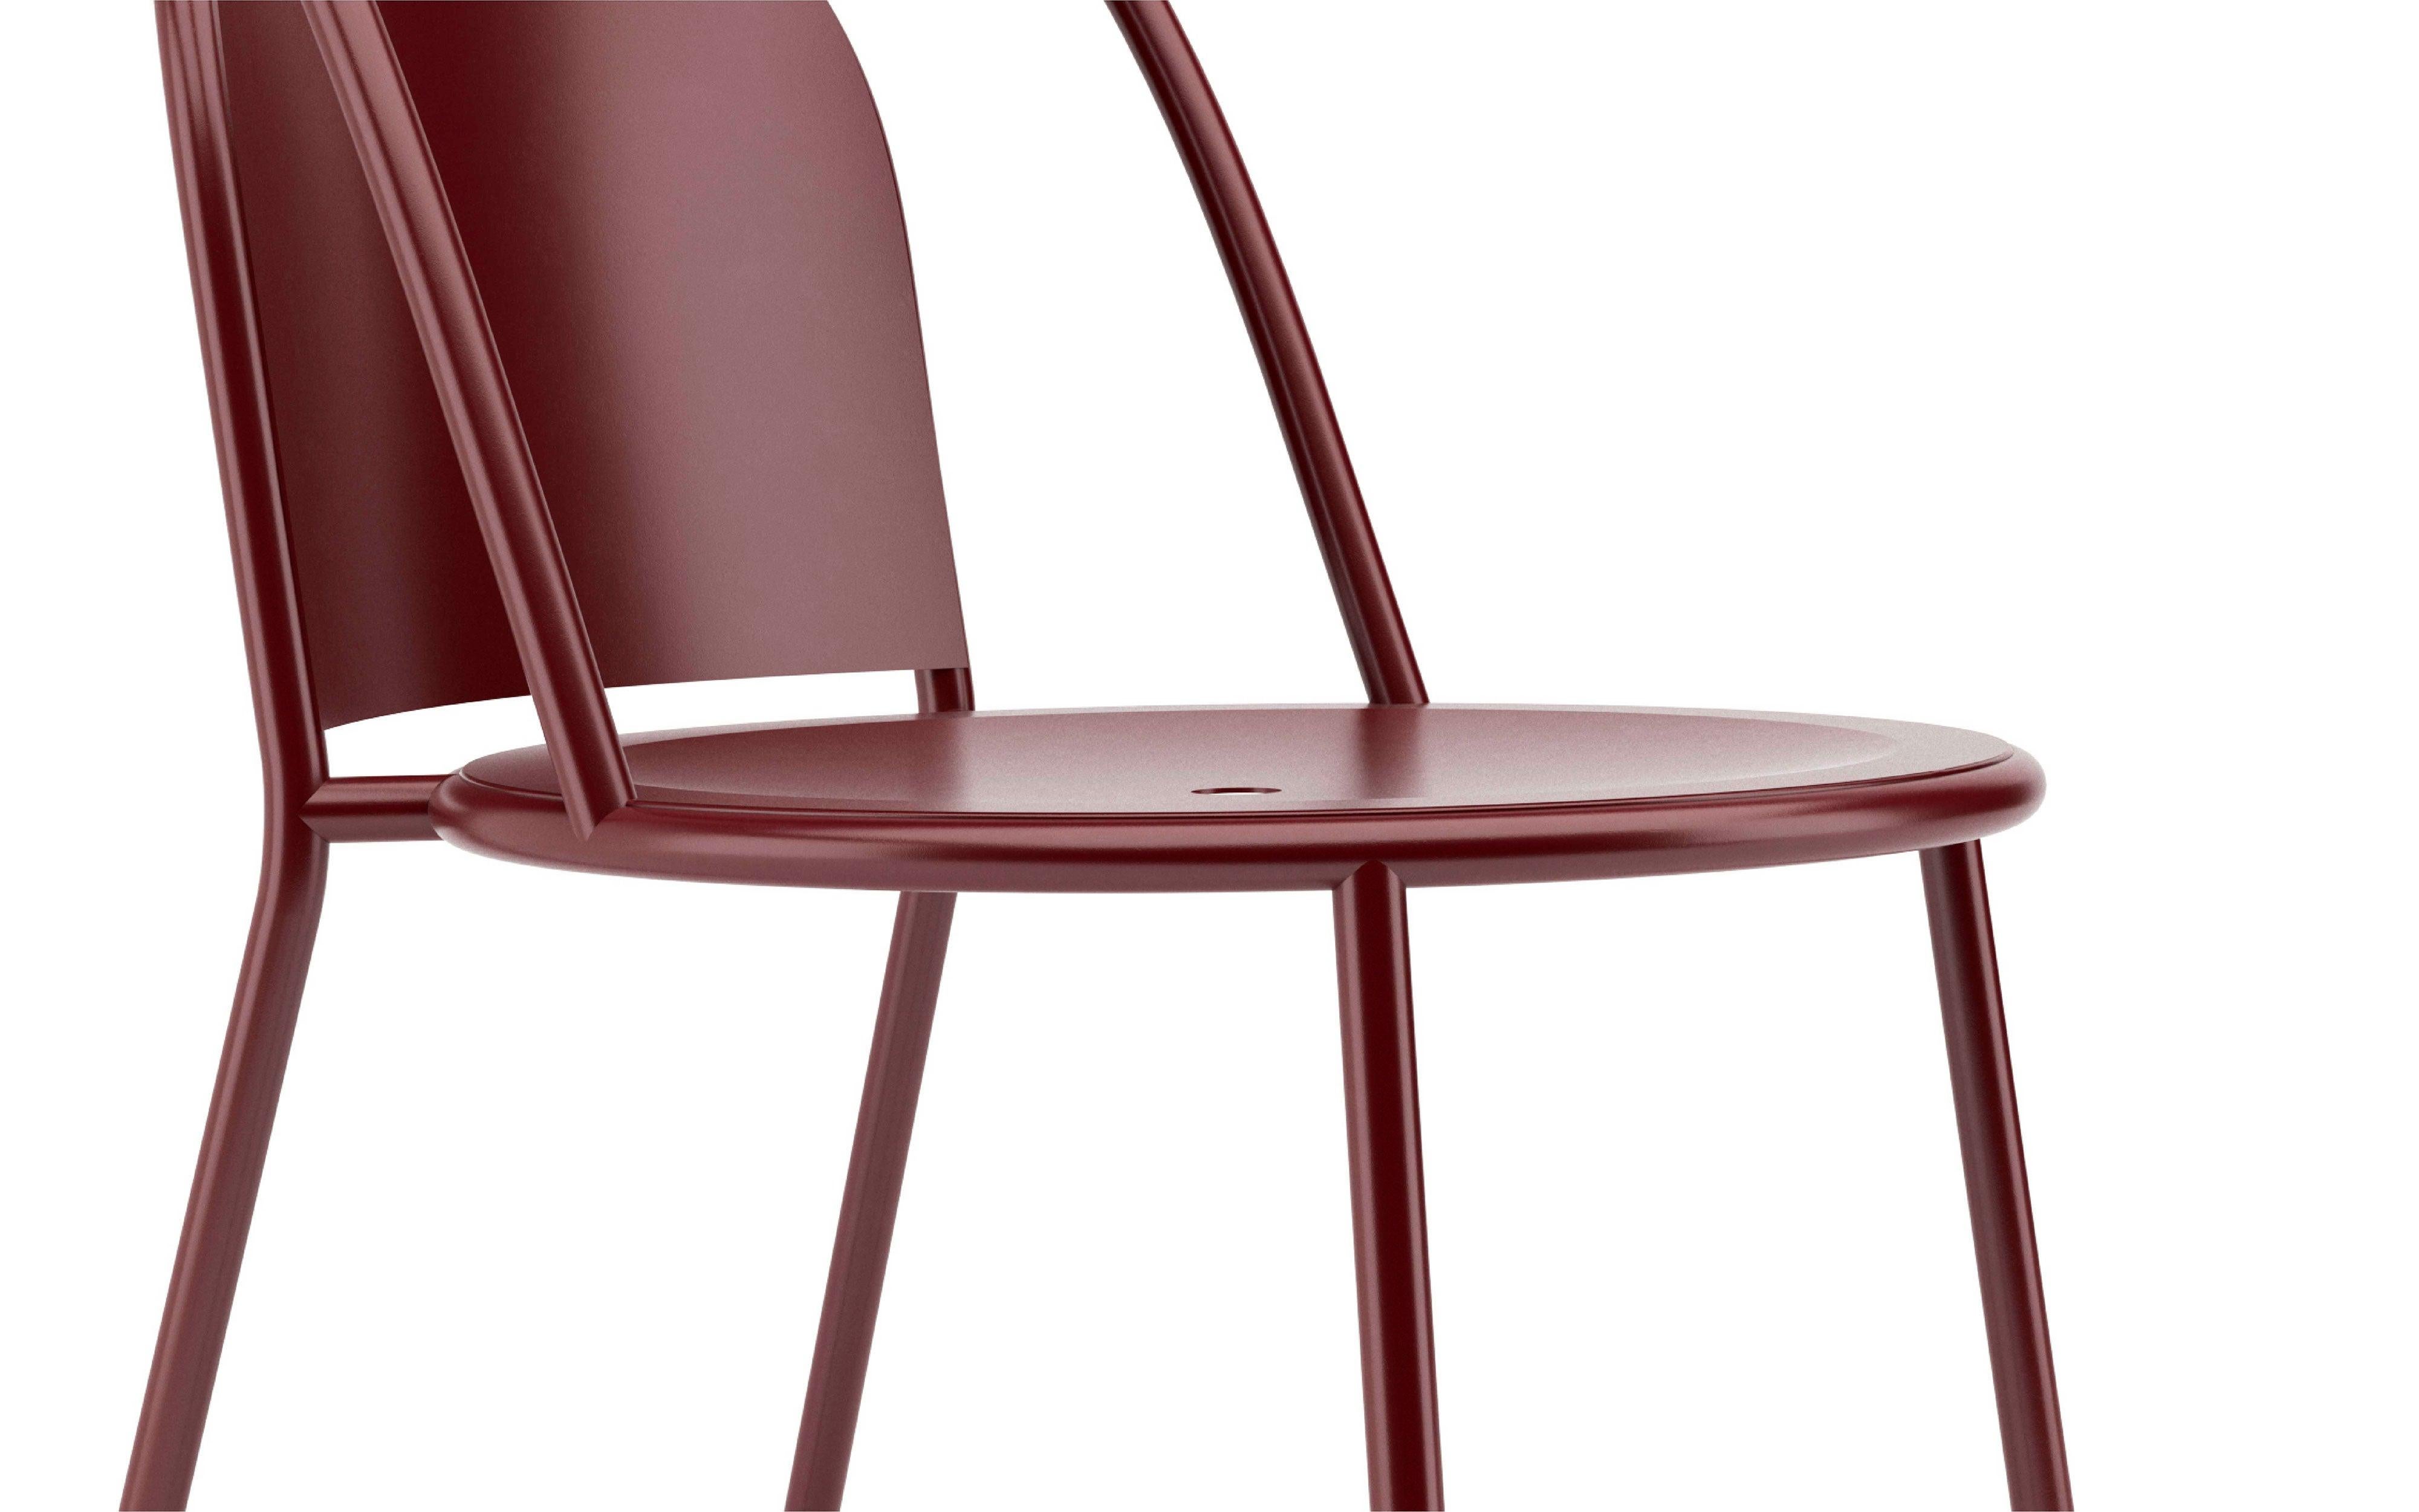 Metalwork Hayche Dune Chair, Red Powder Coated Steel Frame, UK, Made to Order For Sale